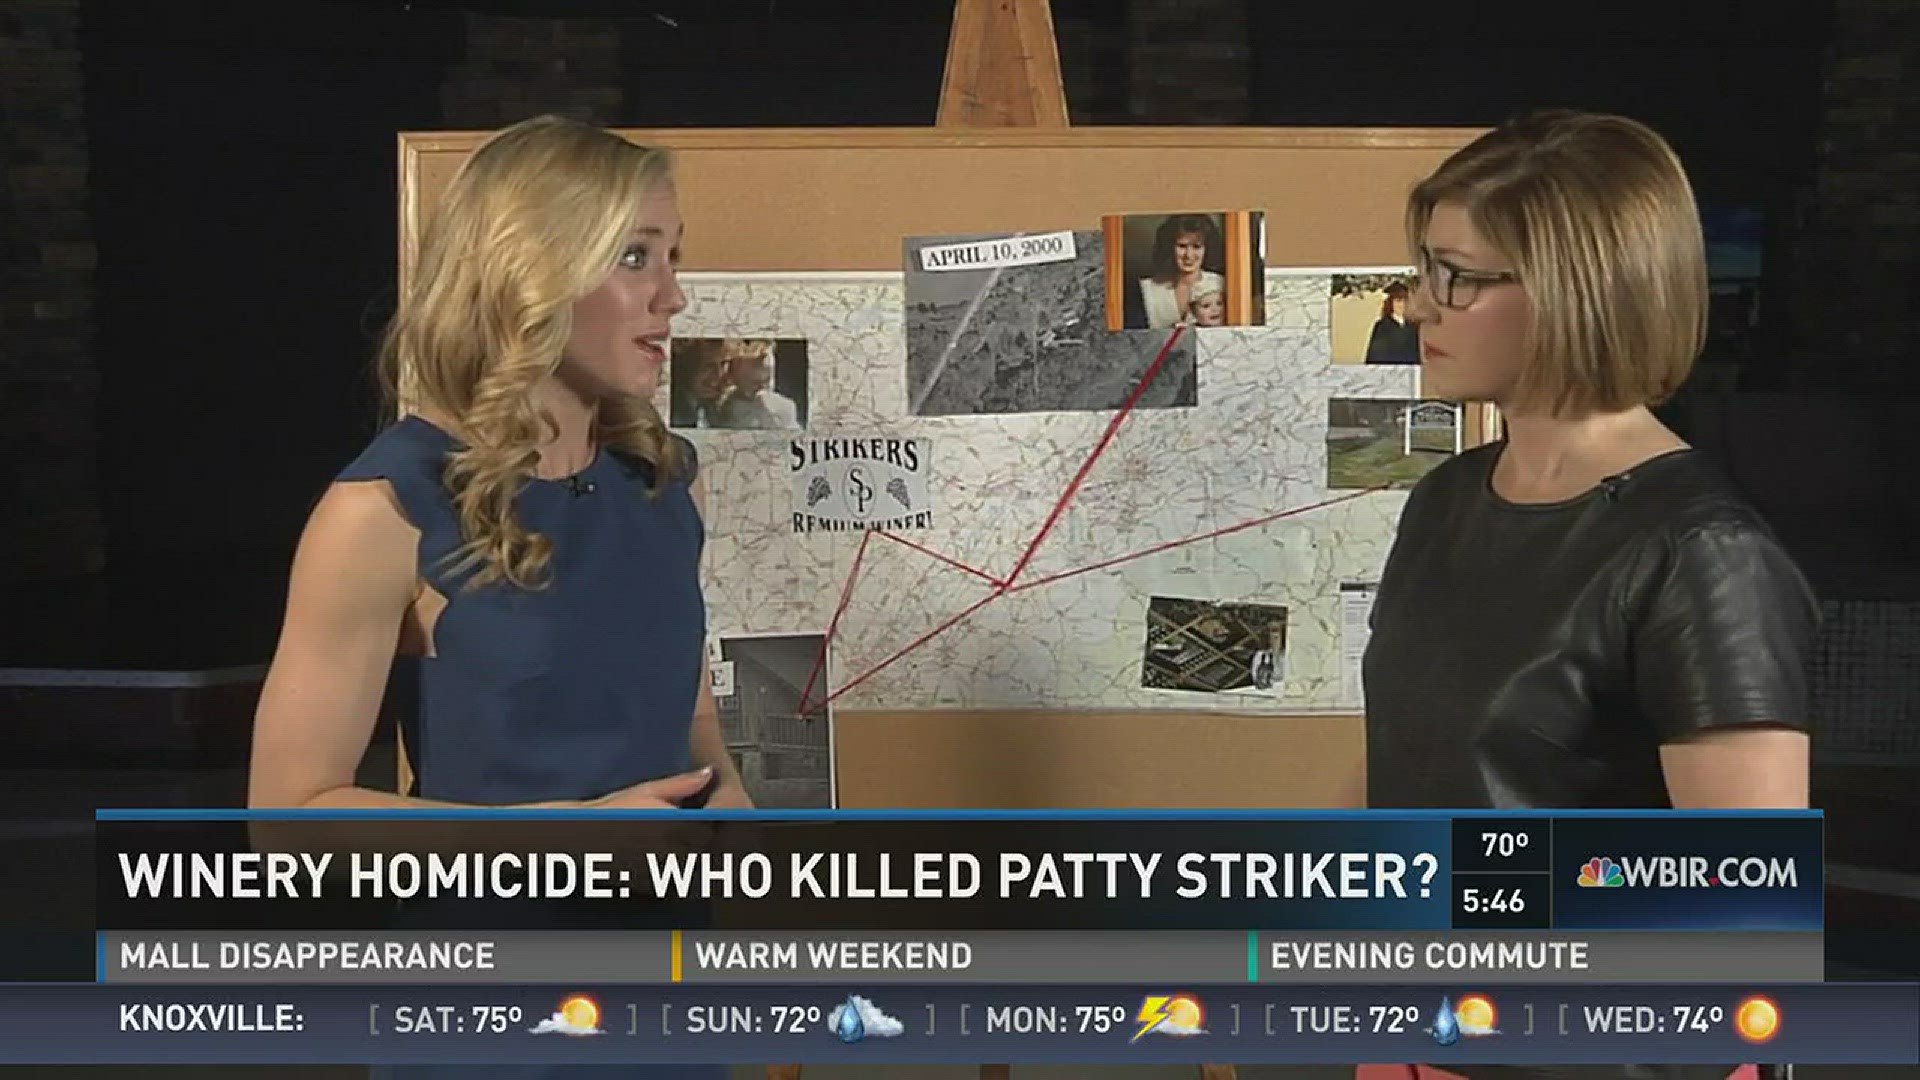 March 24, 2017: Patty Striker was 35-years-old and a mother of four when she was shot to death in her Athens winery. Next month will mark 17 years since her murder, and the case is still unsolved.